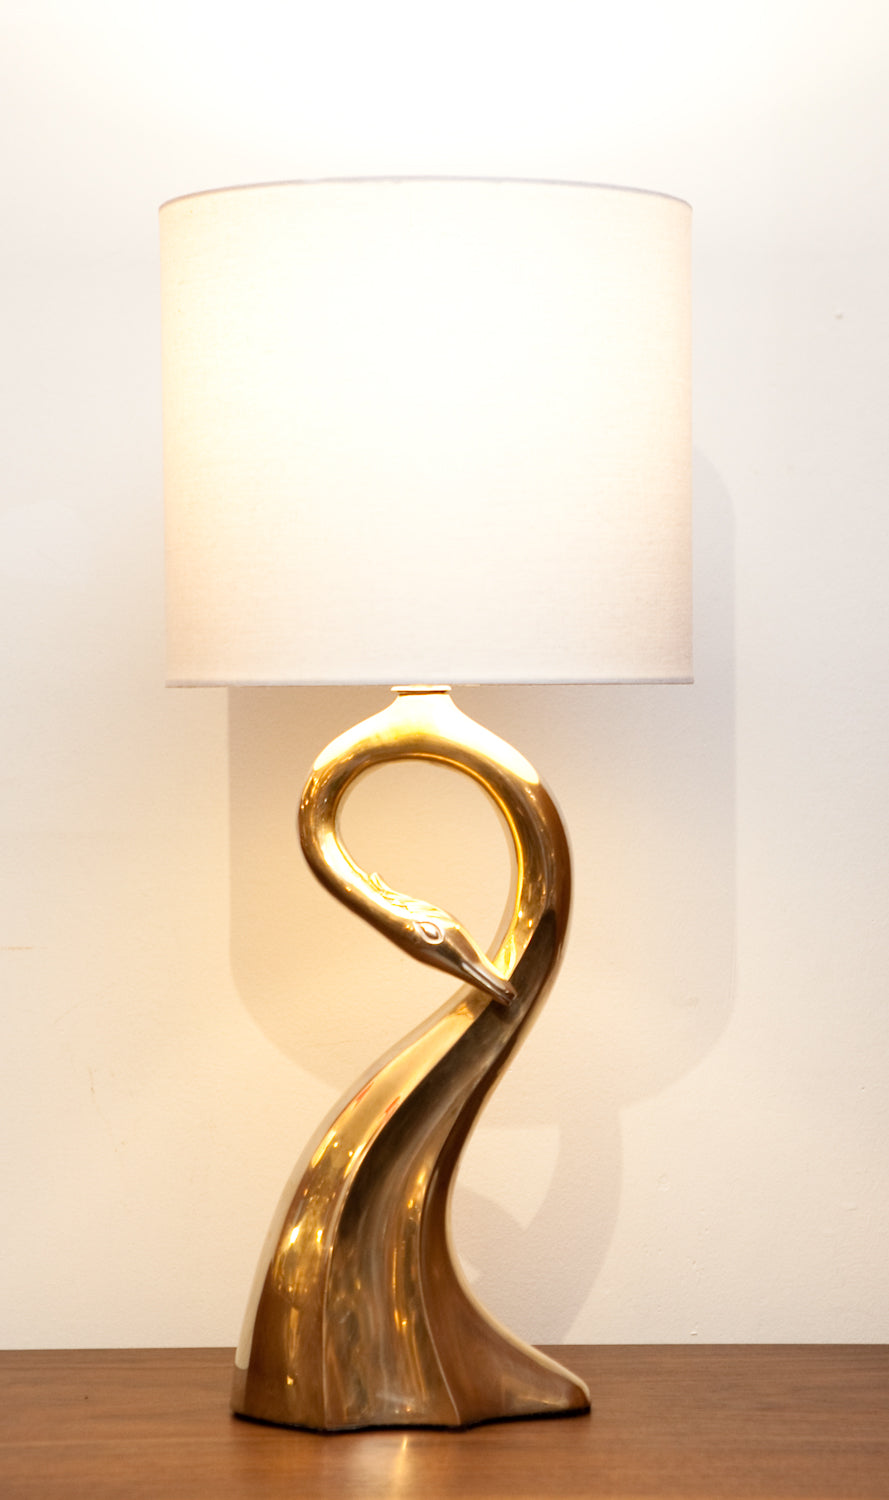 Charming Vintage Brass Swan Lamp, Petite Table Size – The Fab Pad